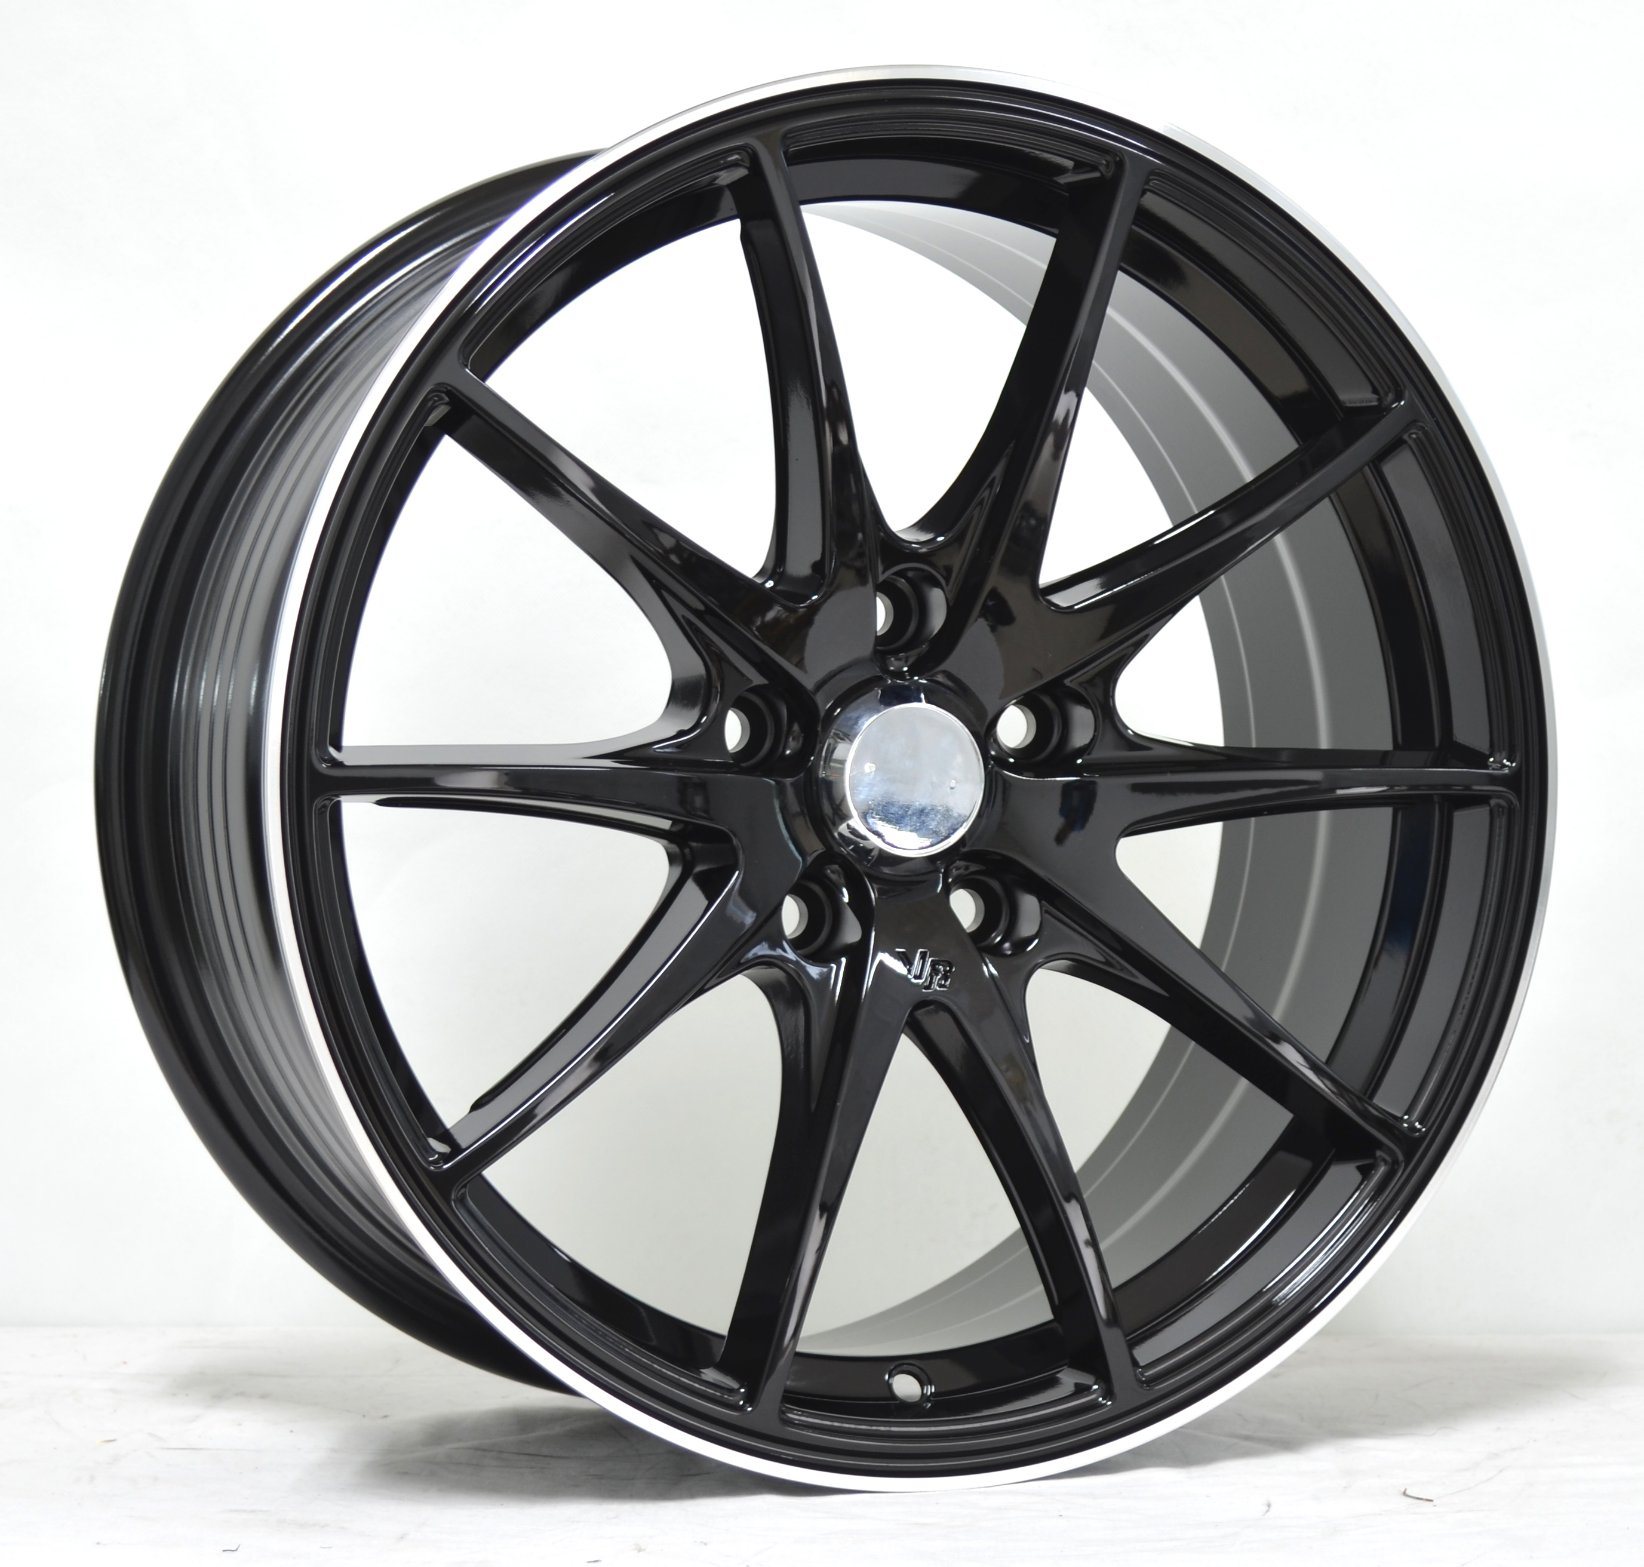 Aftermarket Full Painted Chrome 13inch 14inch 15inch 17inch 18inch 20inch Black Alloy Wheels for Car Kin-G25